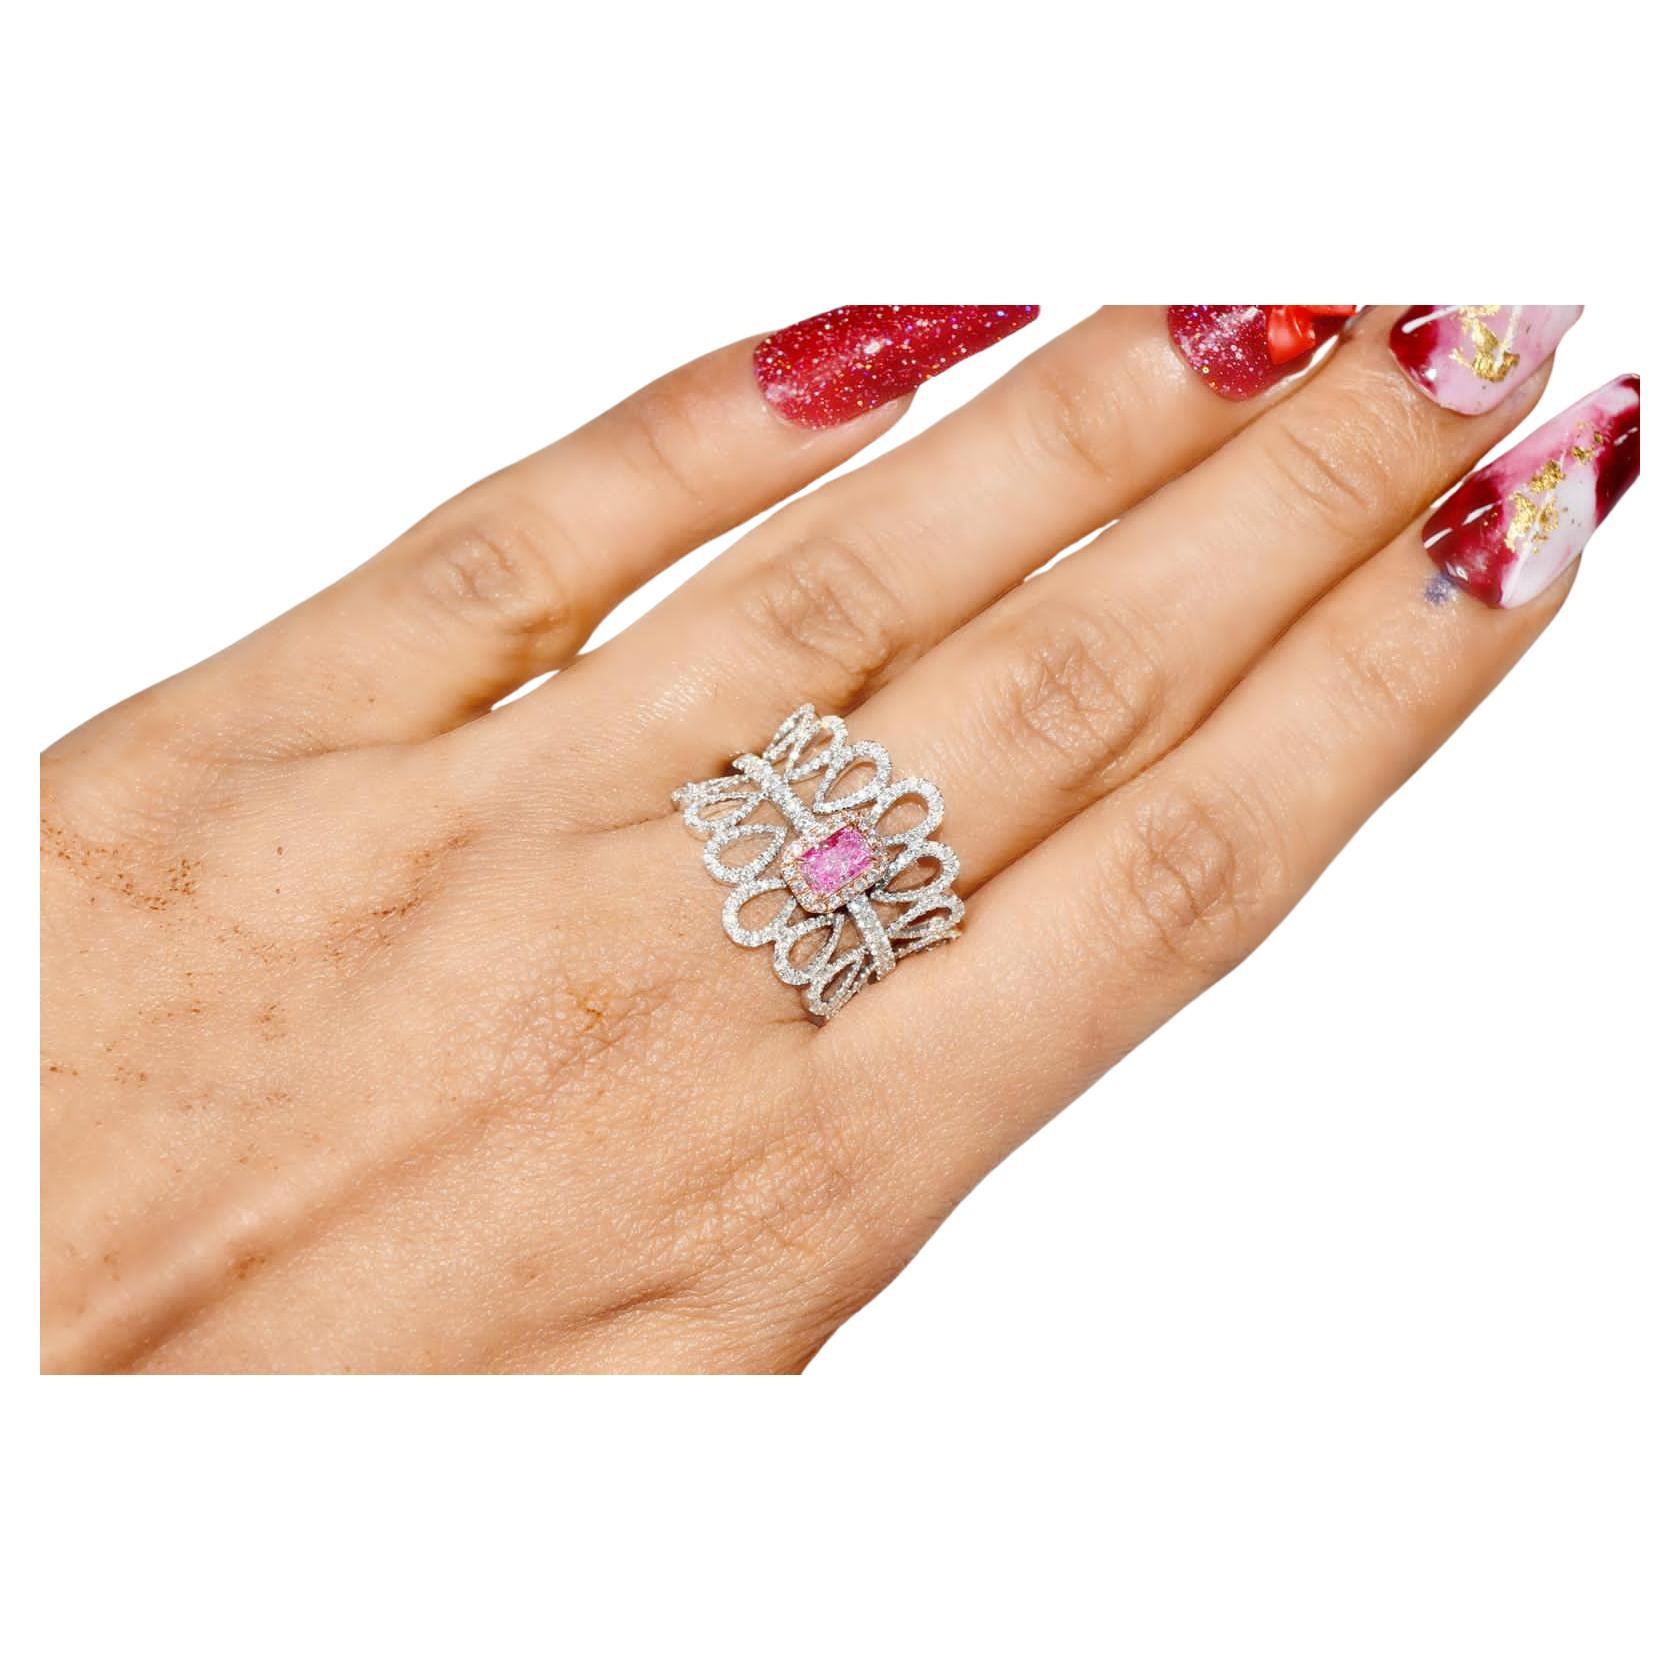 0.40 Carat Very Light Pink Diamond Ring SI2 Clarity GIA Certified For Sale